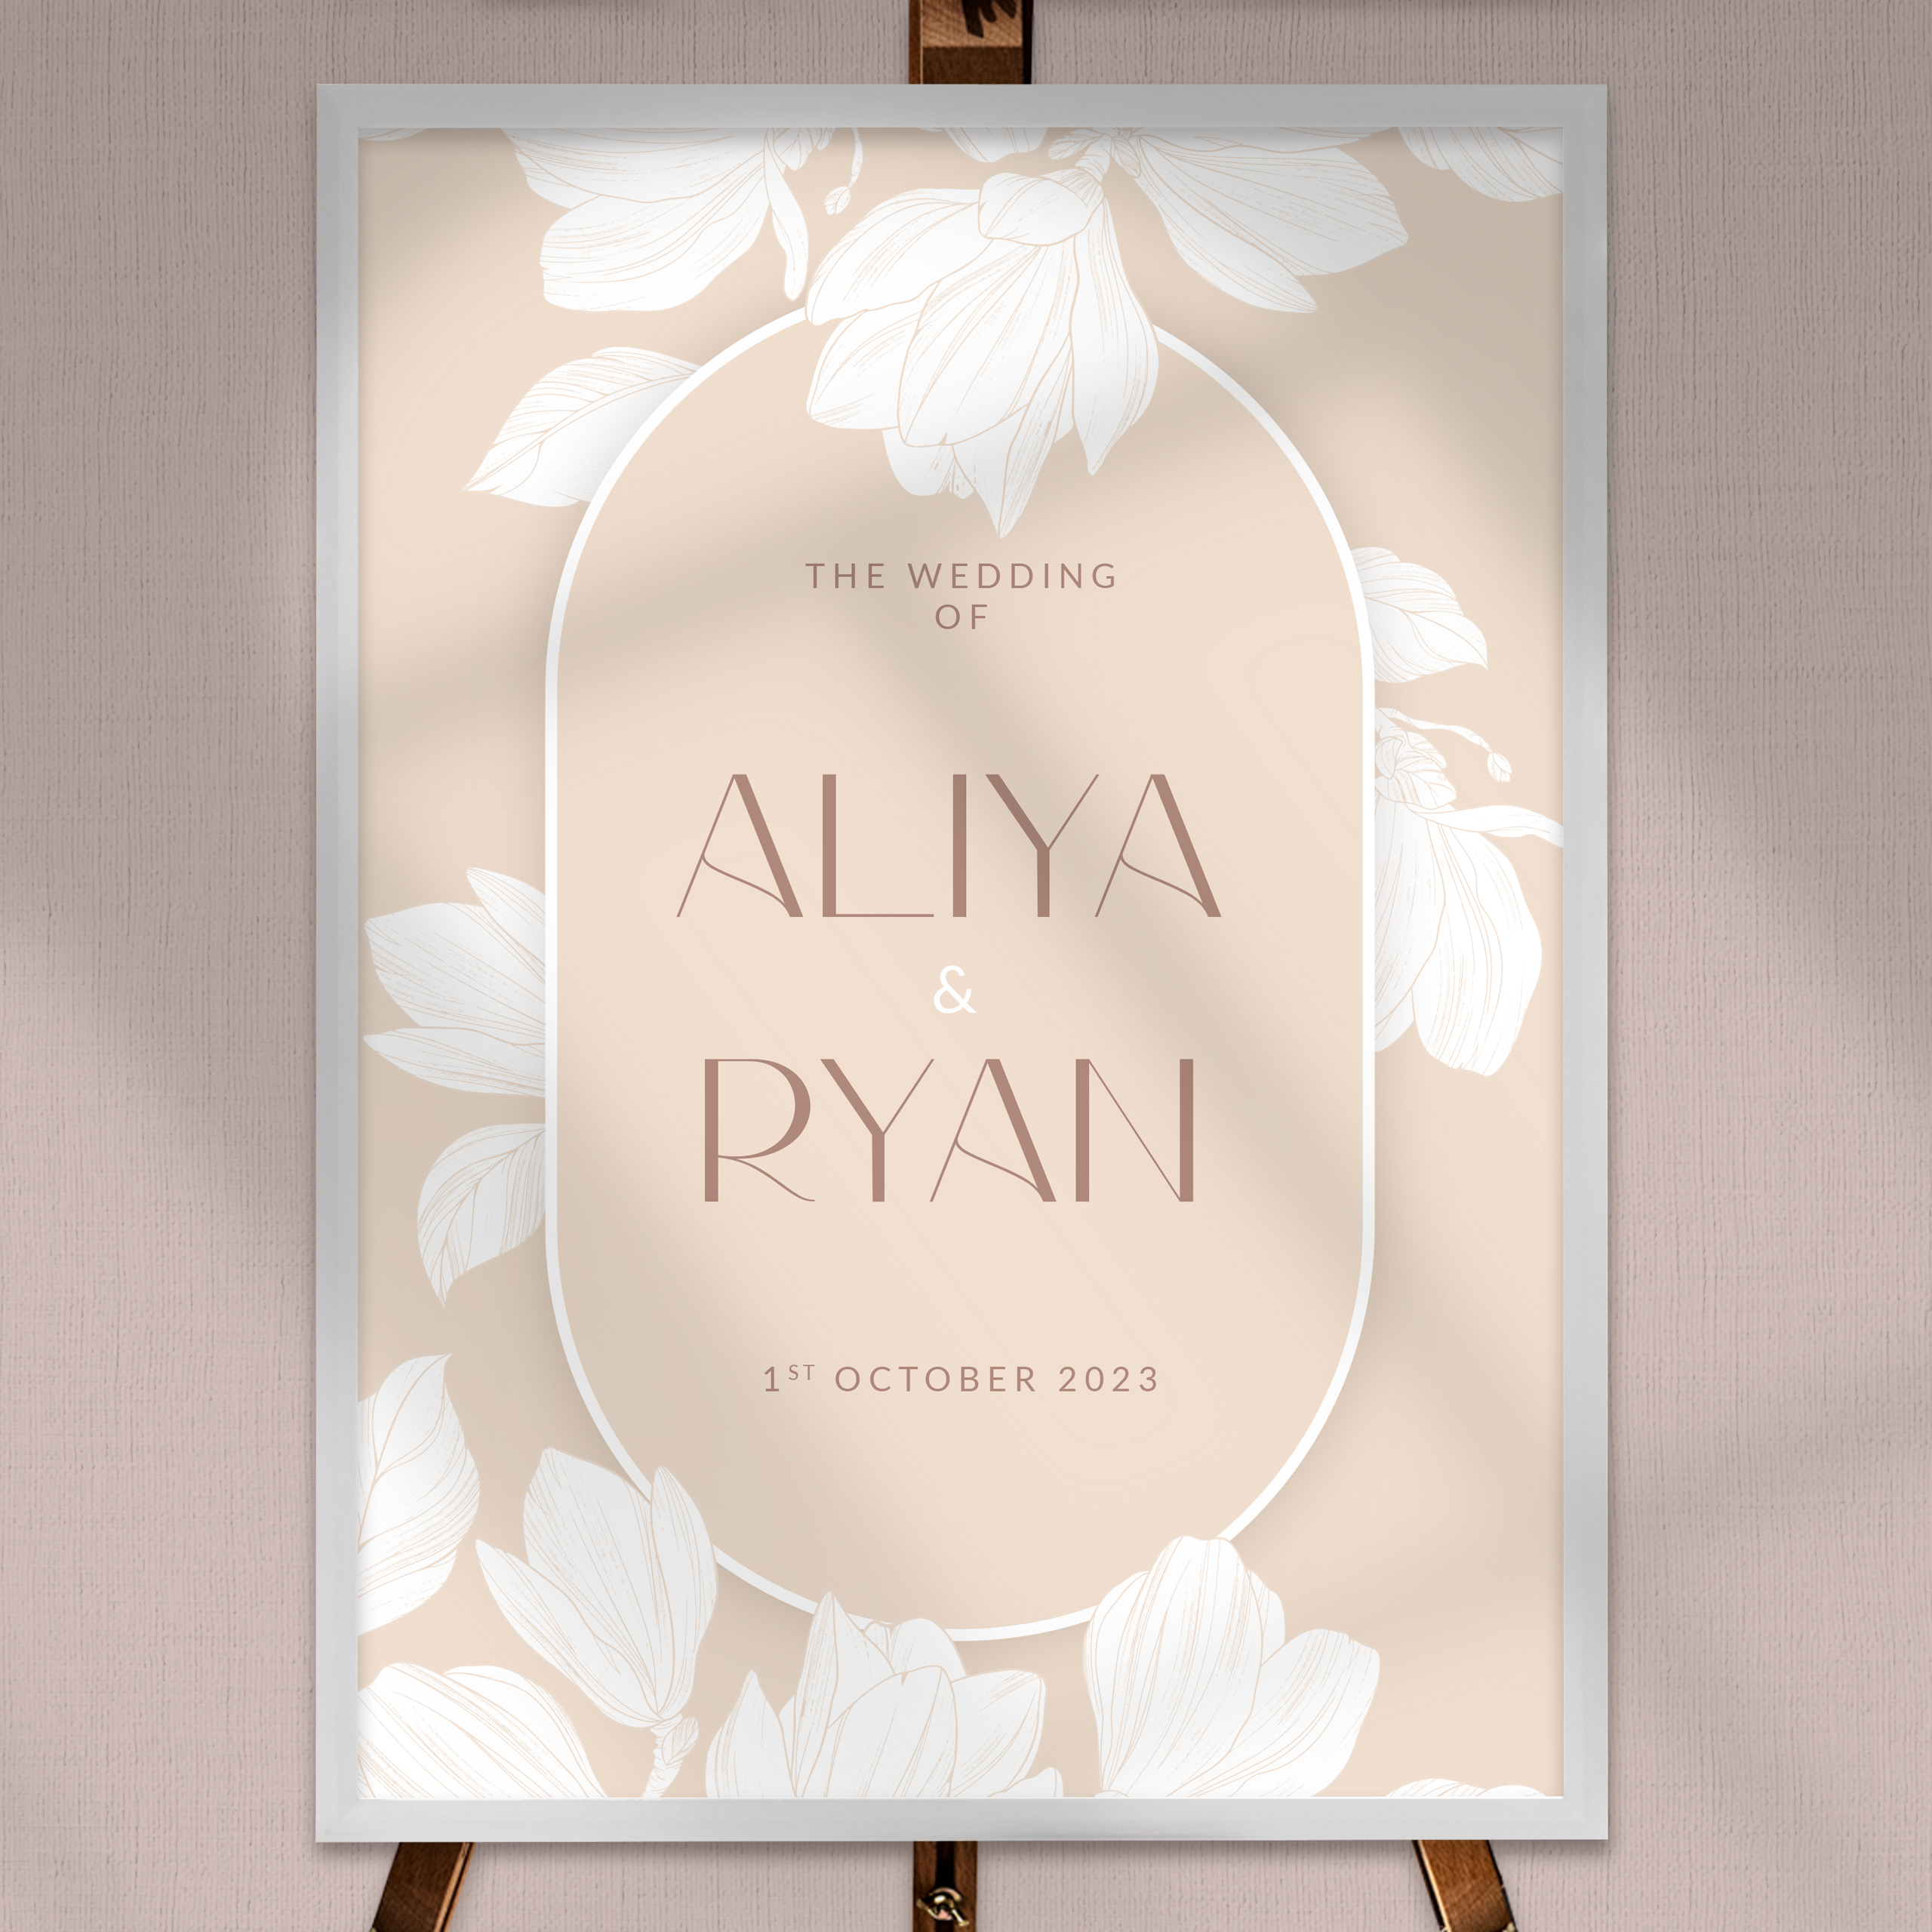 NEW!!! WHITE CYCLAMENS FLORAL ON IVORY WEDDING WELCOME BOARD